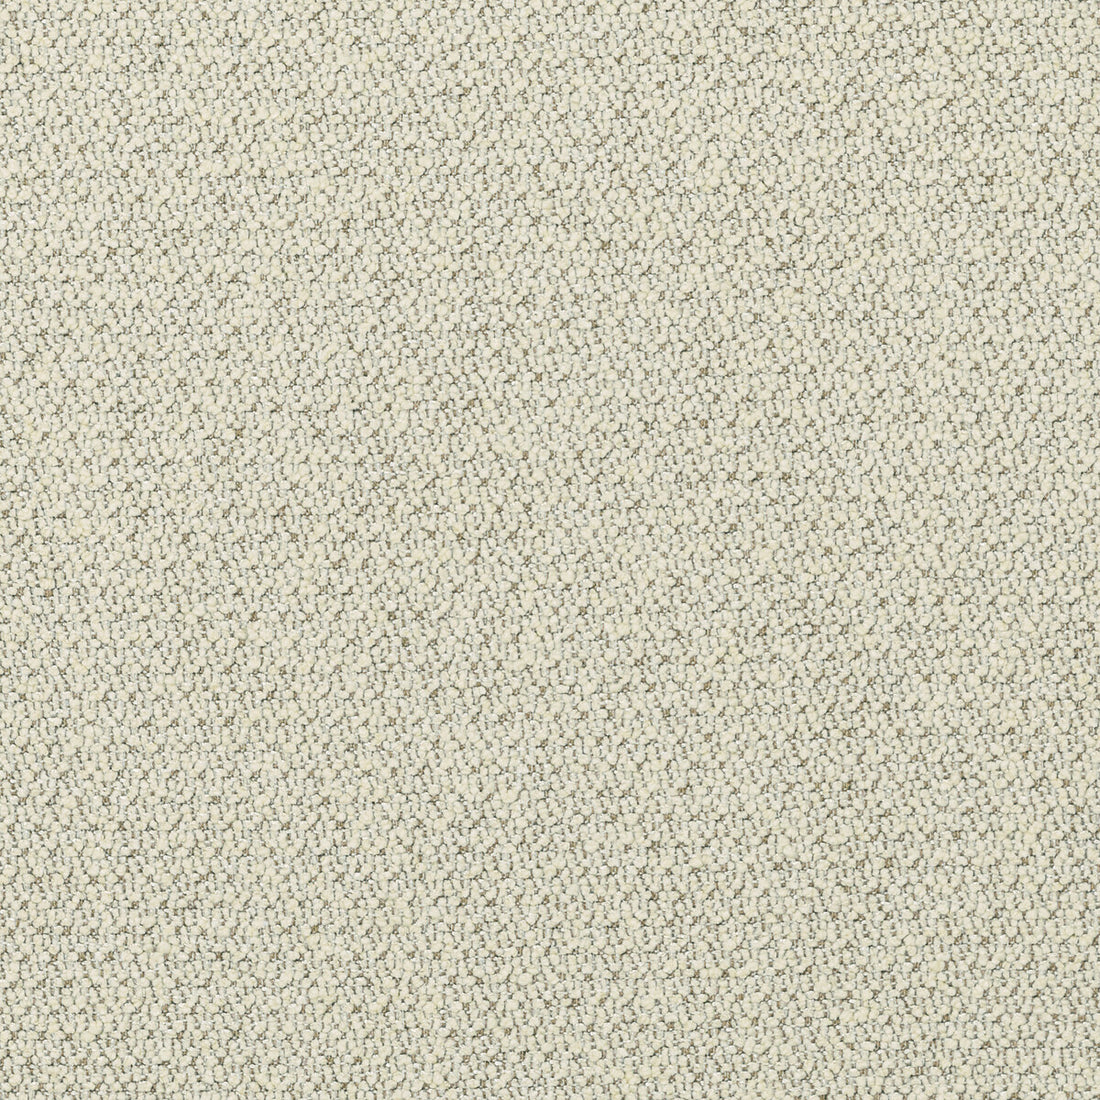 Kravet Couture fabric in 36604-116 color - pattern 36604.116.0 - by Kravet Couture in the Mabley Handler collection